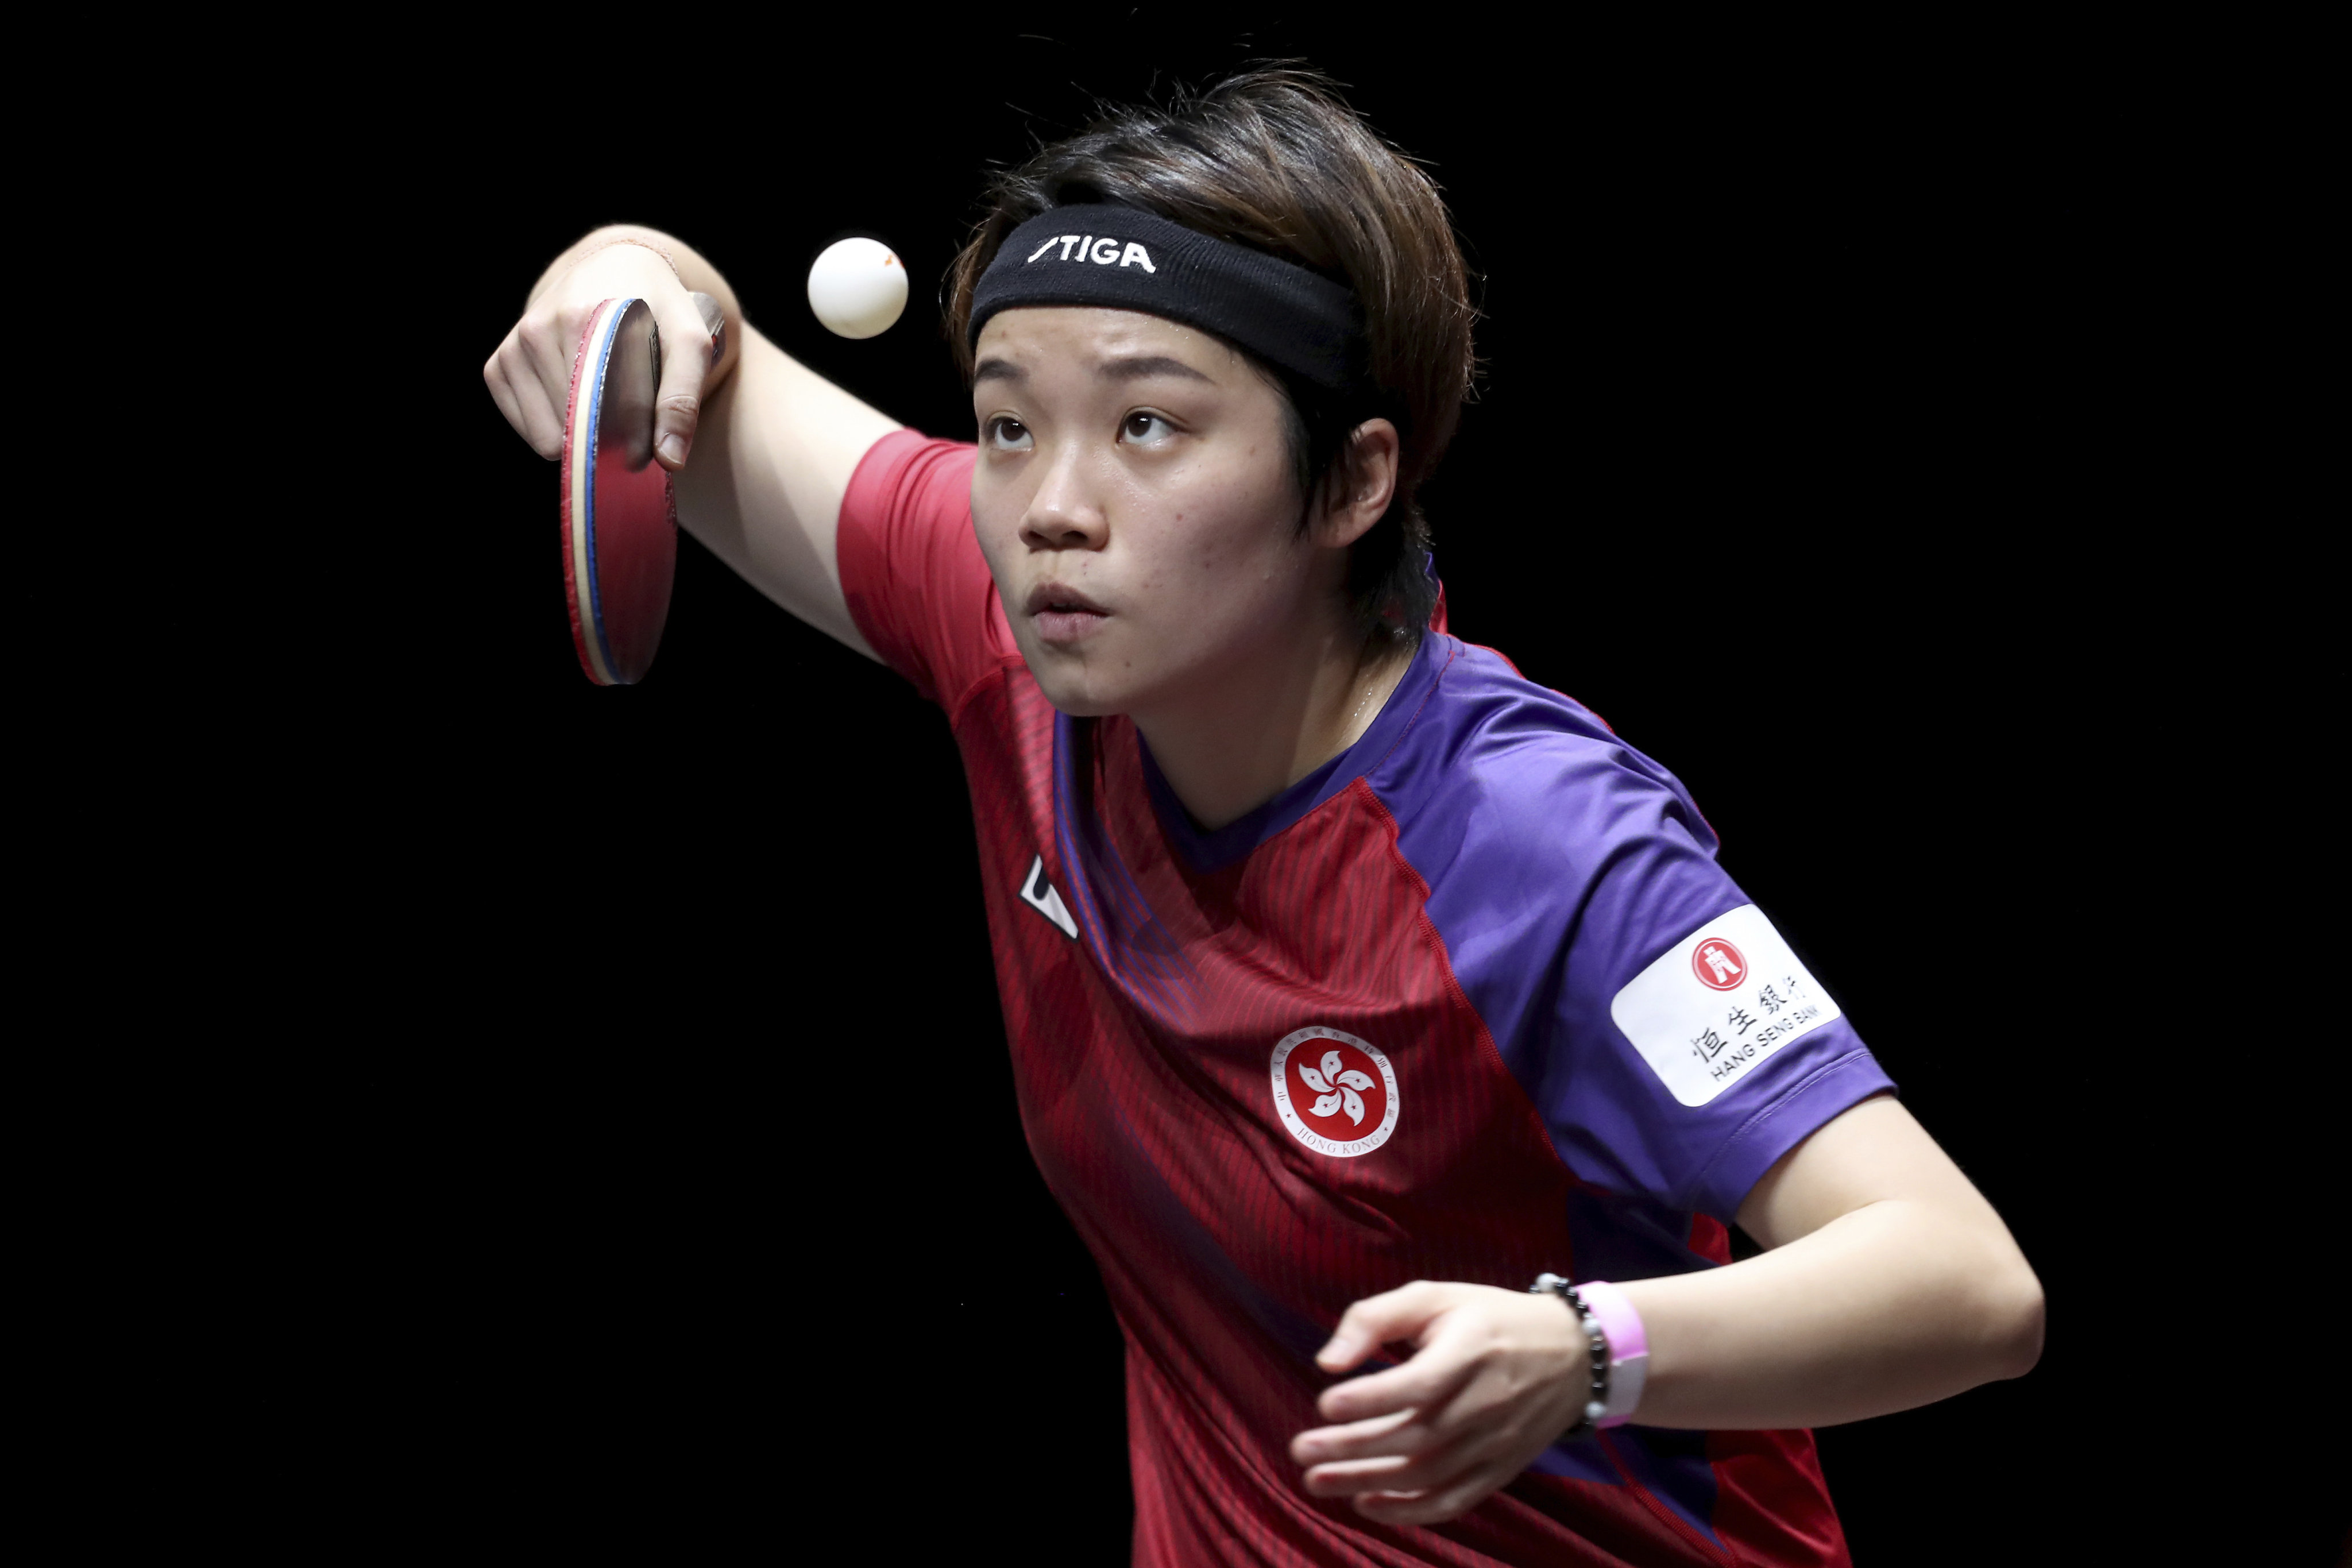 World No 7 Doo Hoi-kem will lead the Hong Kong women’s team at the team World Championships in Chengdu this month. Photo: AP